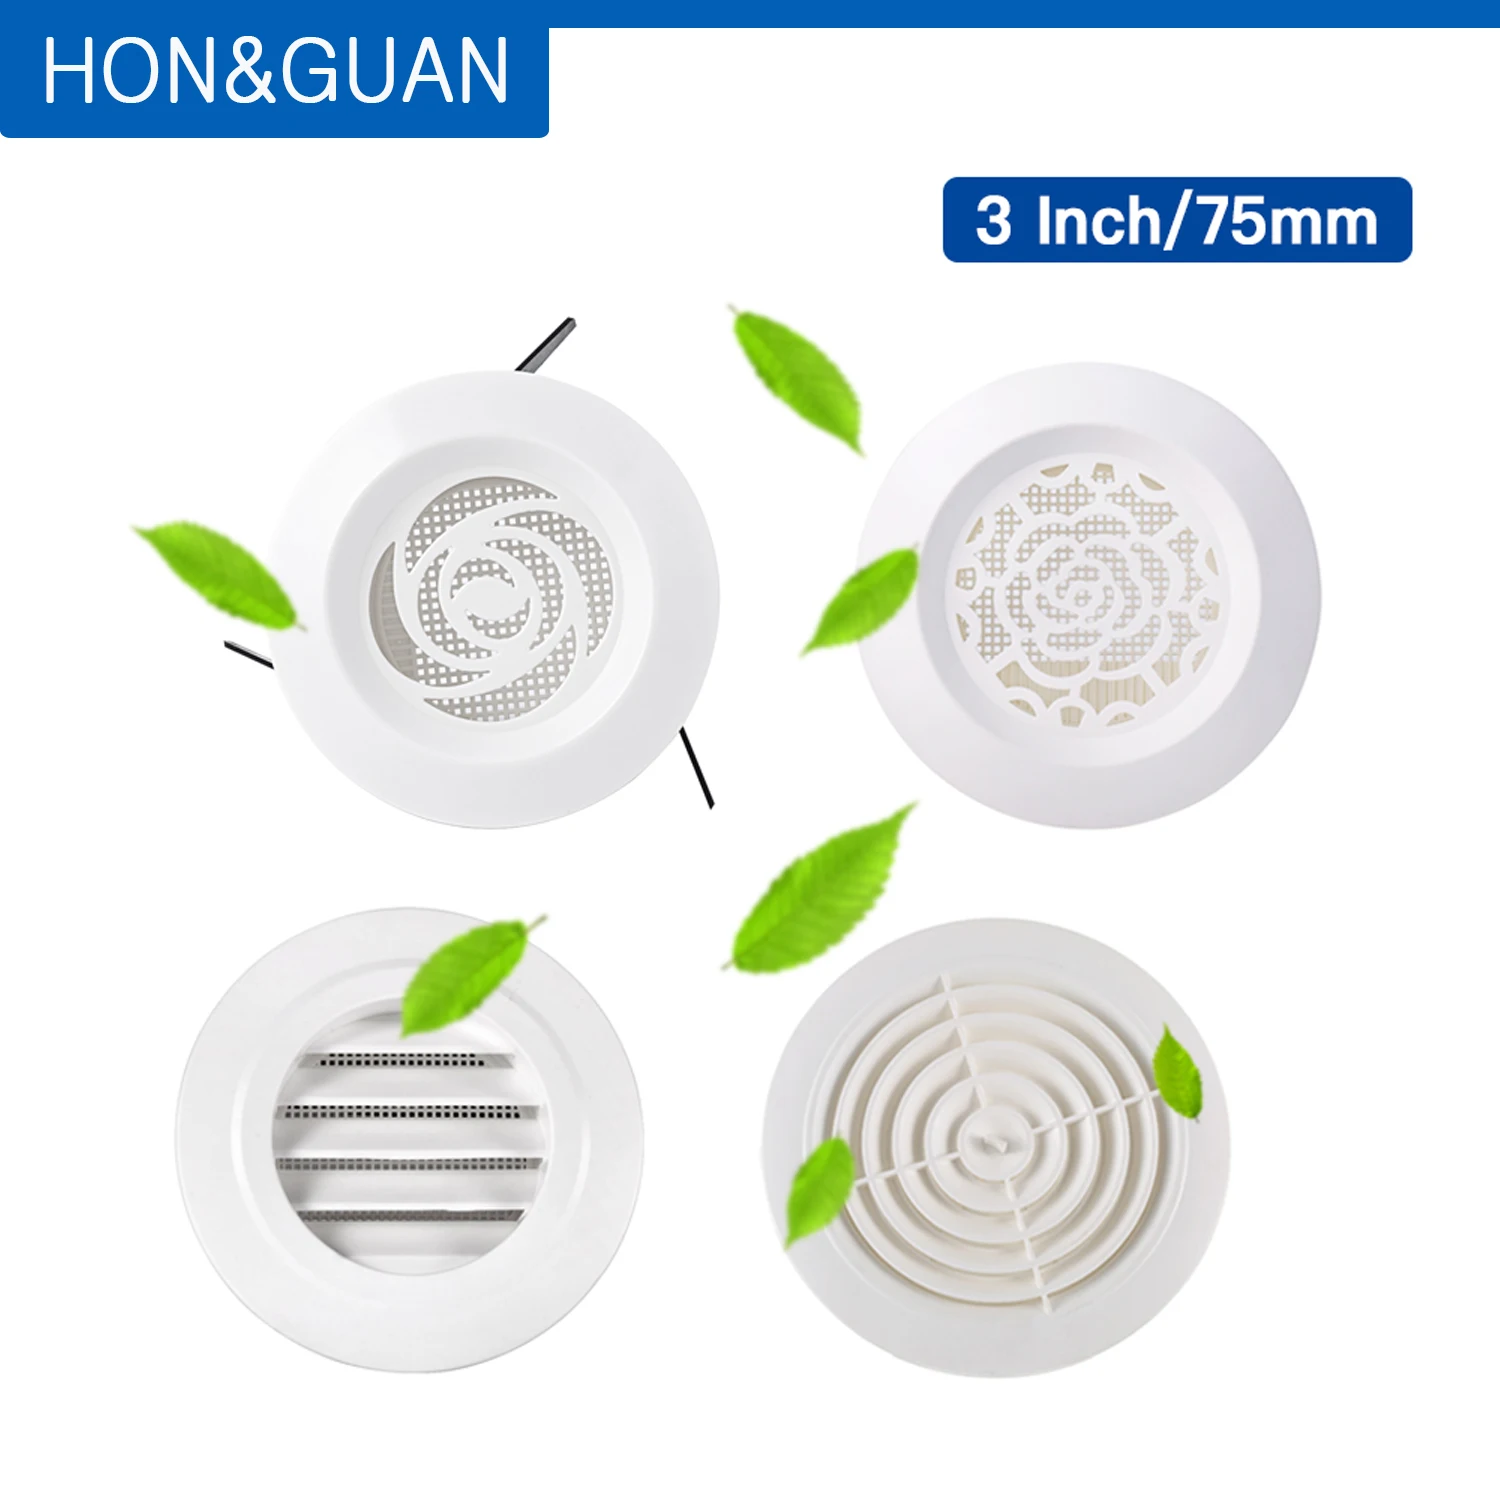 Hon&Guan 3-8" Circle ABS Air Vent Grille Cover Round Ventilation With Insect Net 